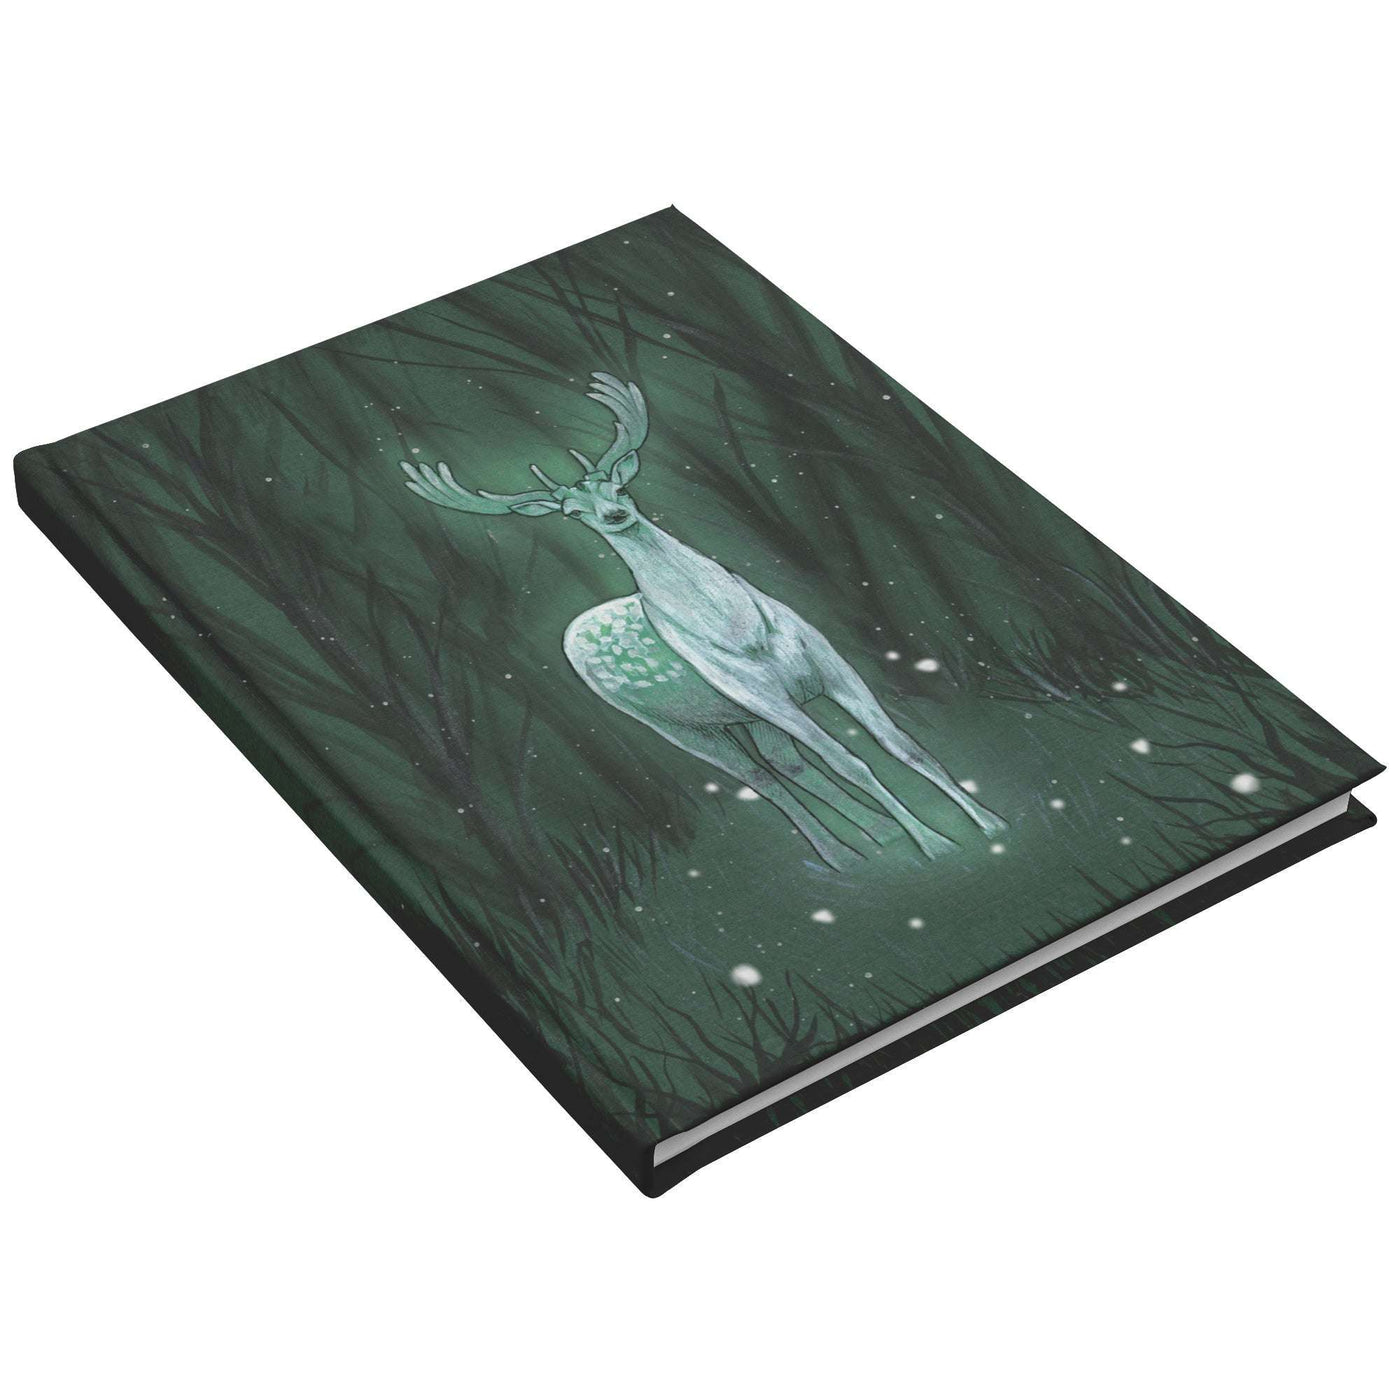 Illustration on the Enchanted Deer Journal cover featuring a mystical white deer with glowing spots, standing amidst a dark, green forest with falling snowflakes.